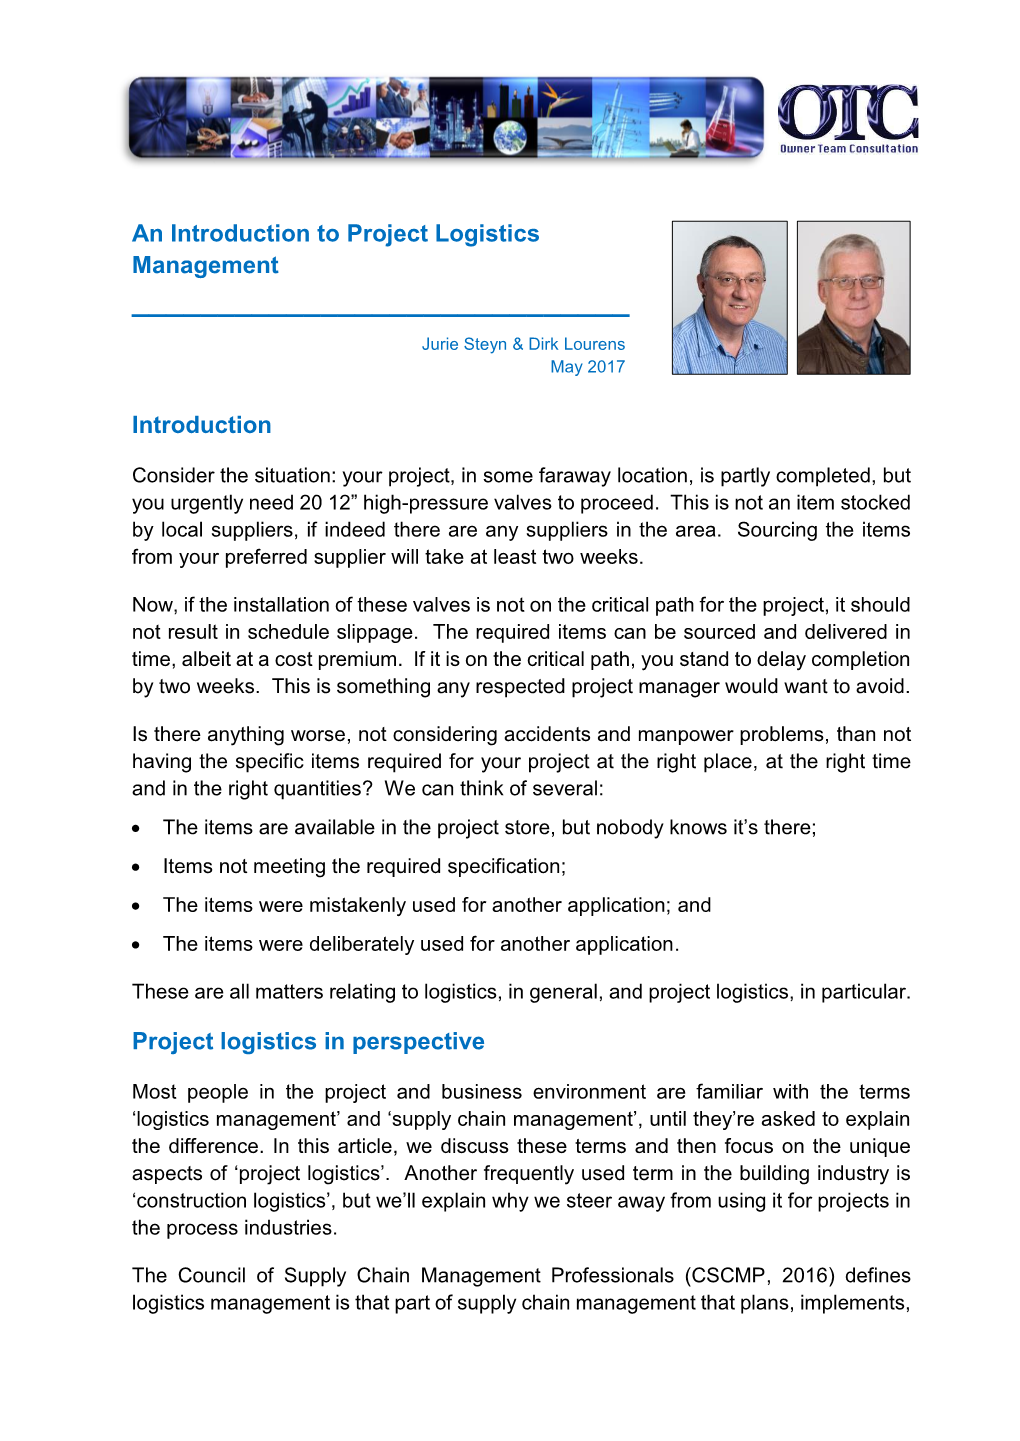 An Introduction to Project Logistics Management Introduction Project